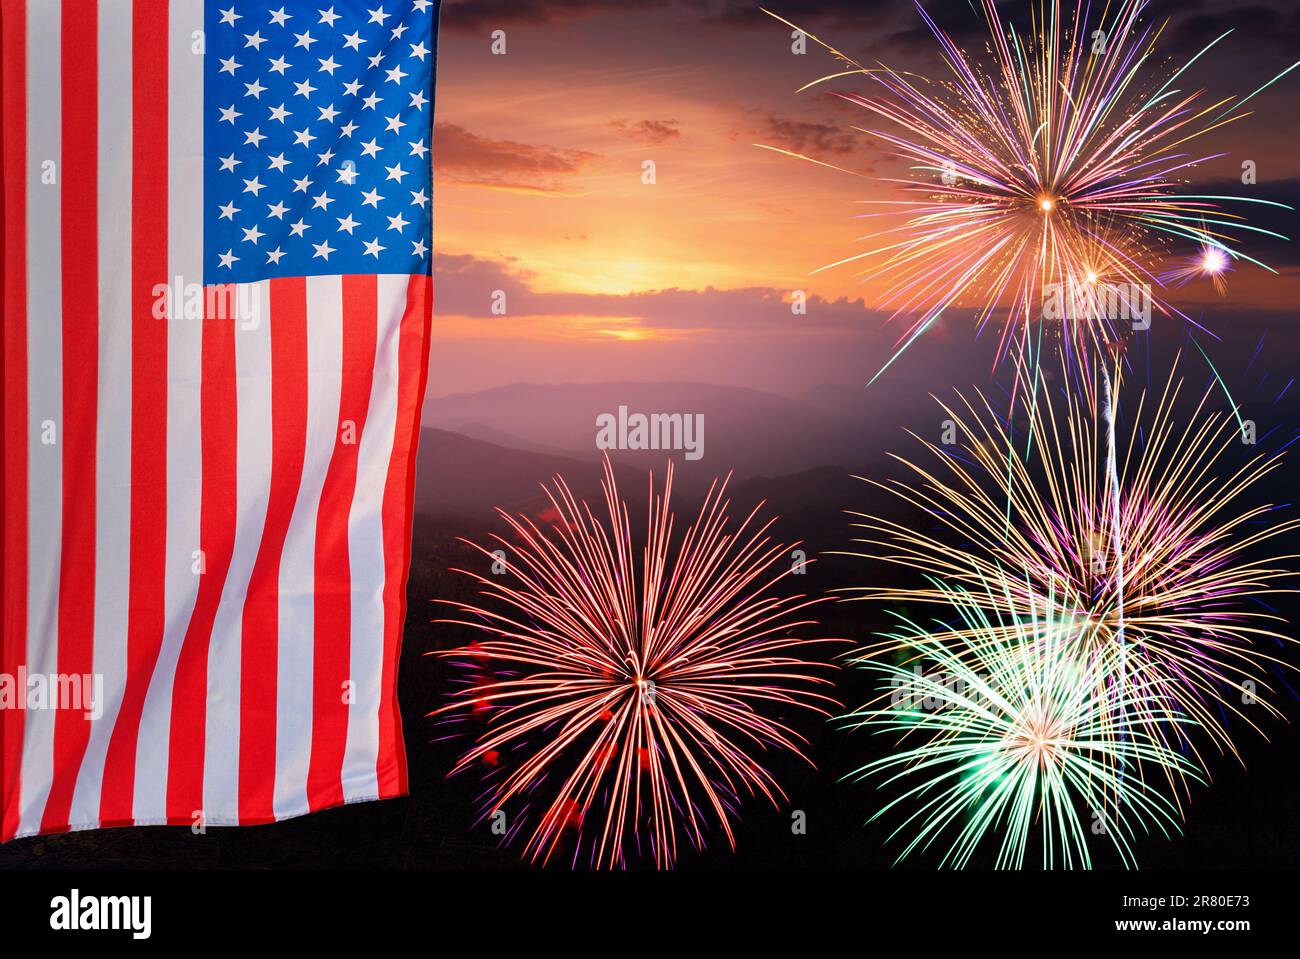 USA Flag on Fireworks Background. 4th of July Independence Day, Patriotic Holiday, Celebration Concept. Stock Photo